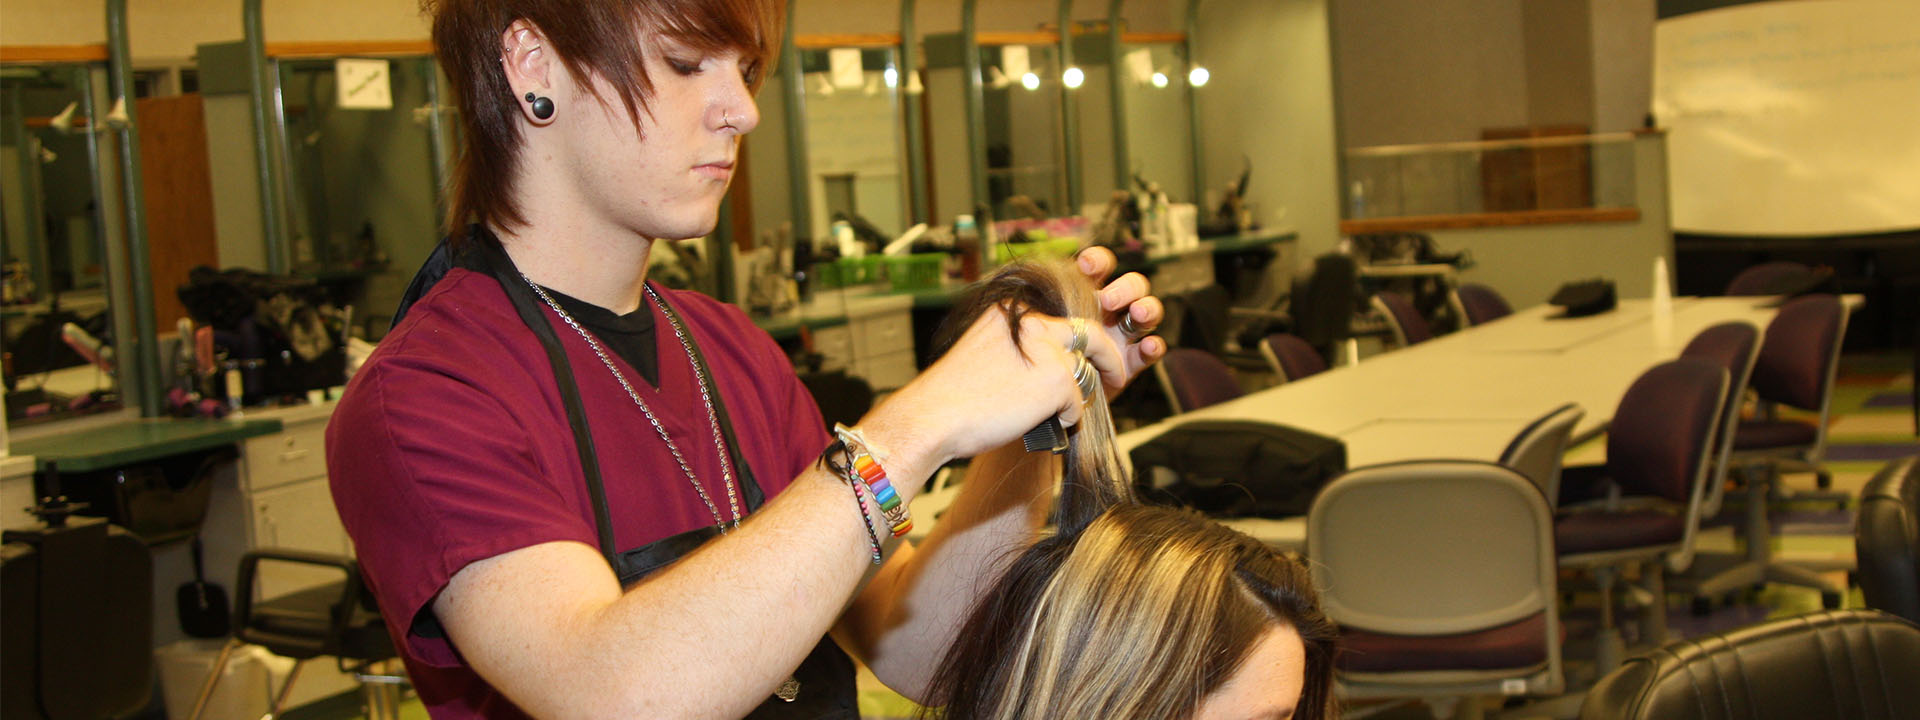 A student combs a client's hair